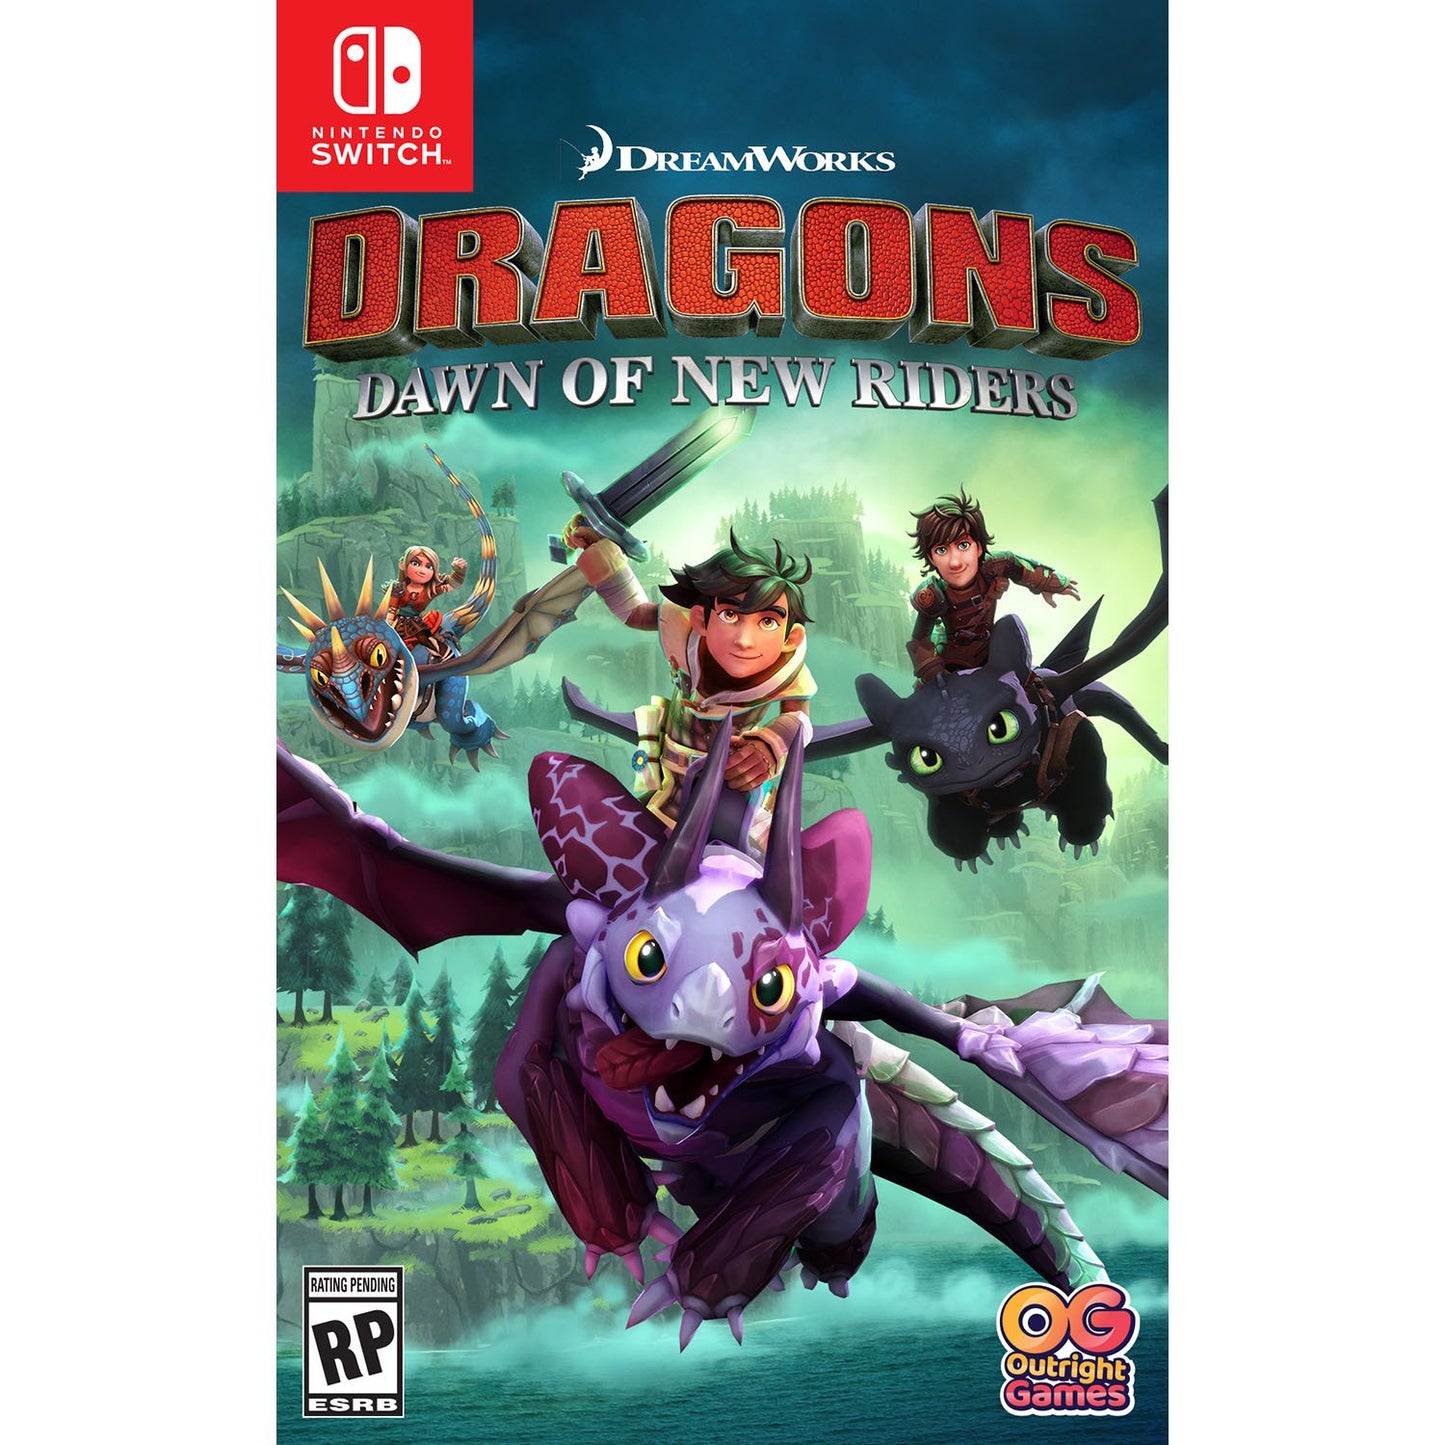 Switch - Dreamworks Dragons Dawn Of The New Riders  - Fisico - Usado